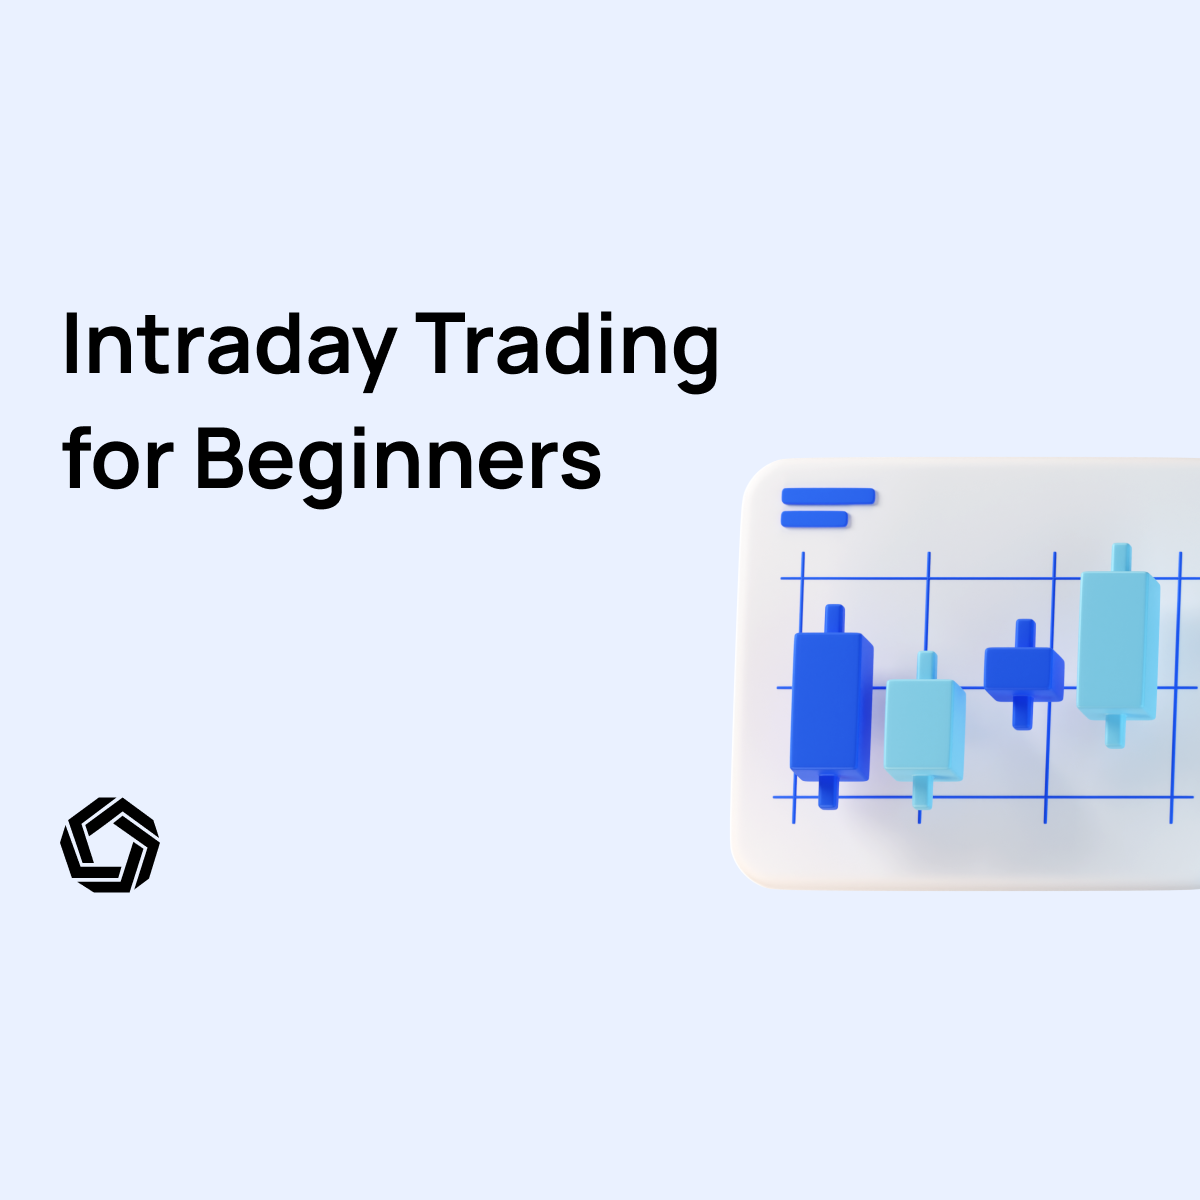 Intraday Trading Guide